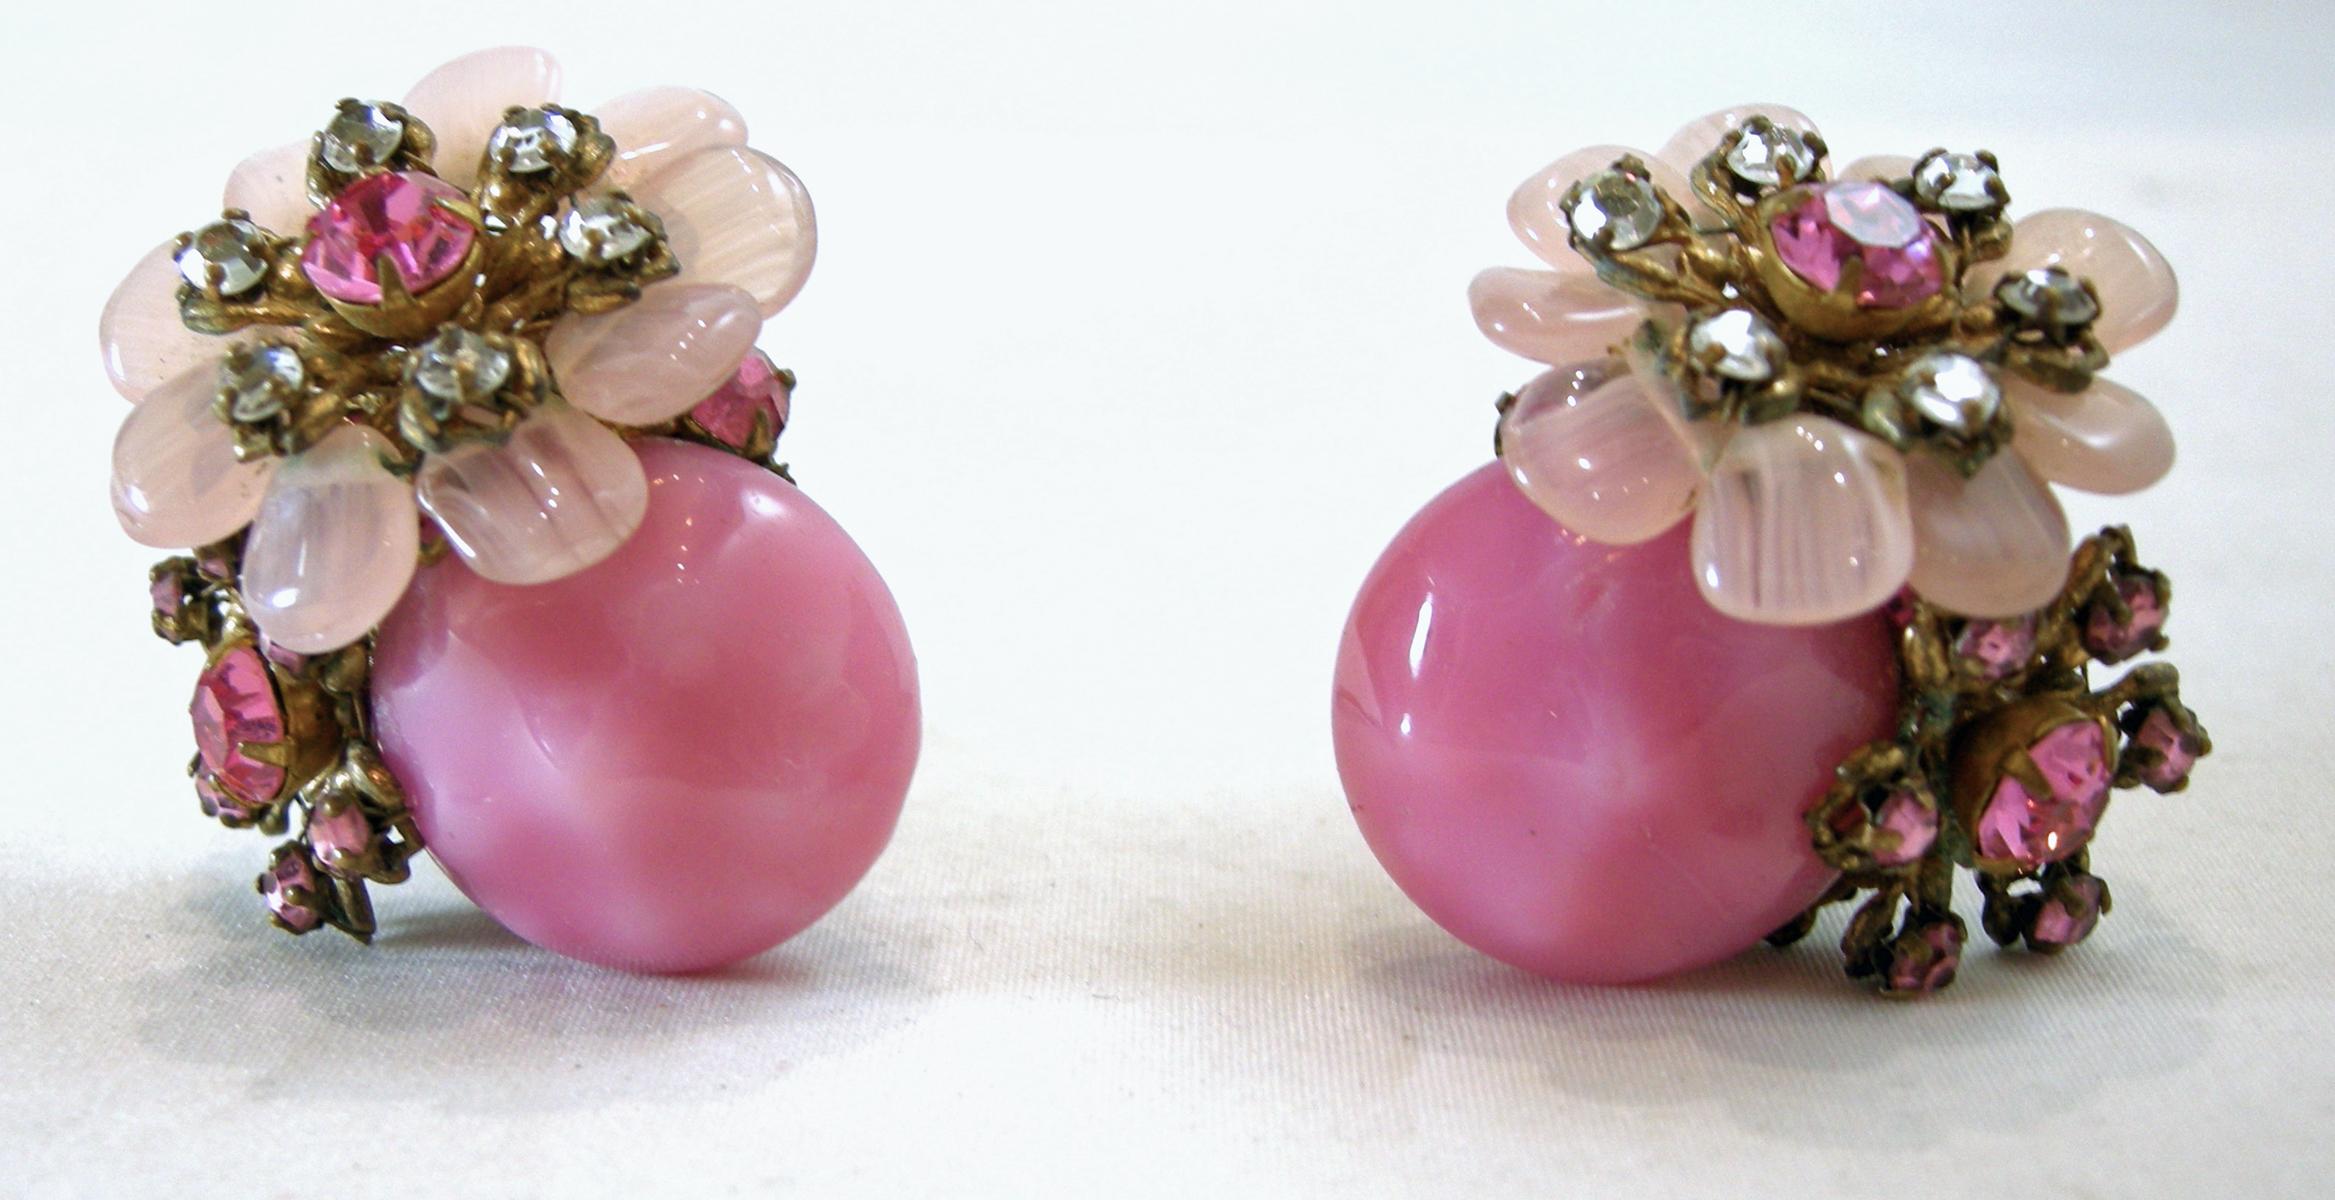 These vintage book piece signed Miriam Haskell earrings have a floral design with a large pink poured glass with pink and clear crystals flowers on top … in a gold tone setting.  These clip earrings measure 1-1/4” x 1-1/4” and are signed “Miriam